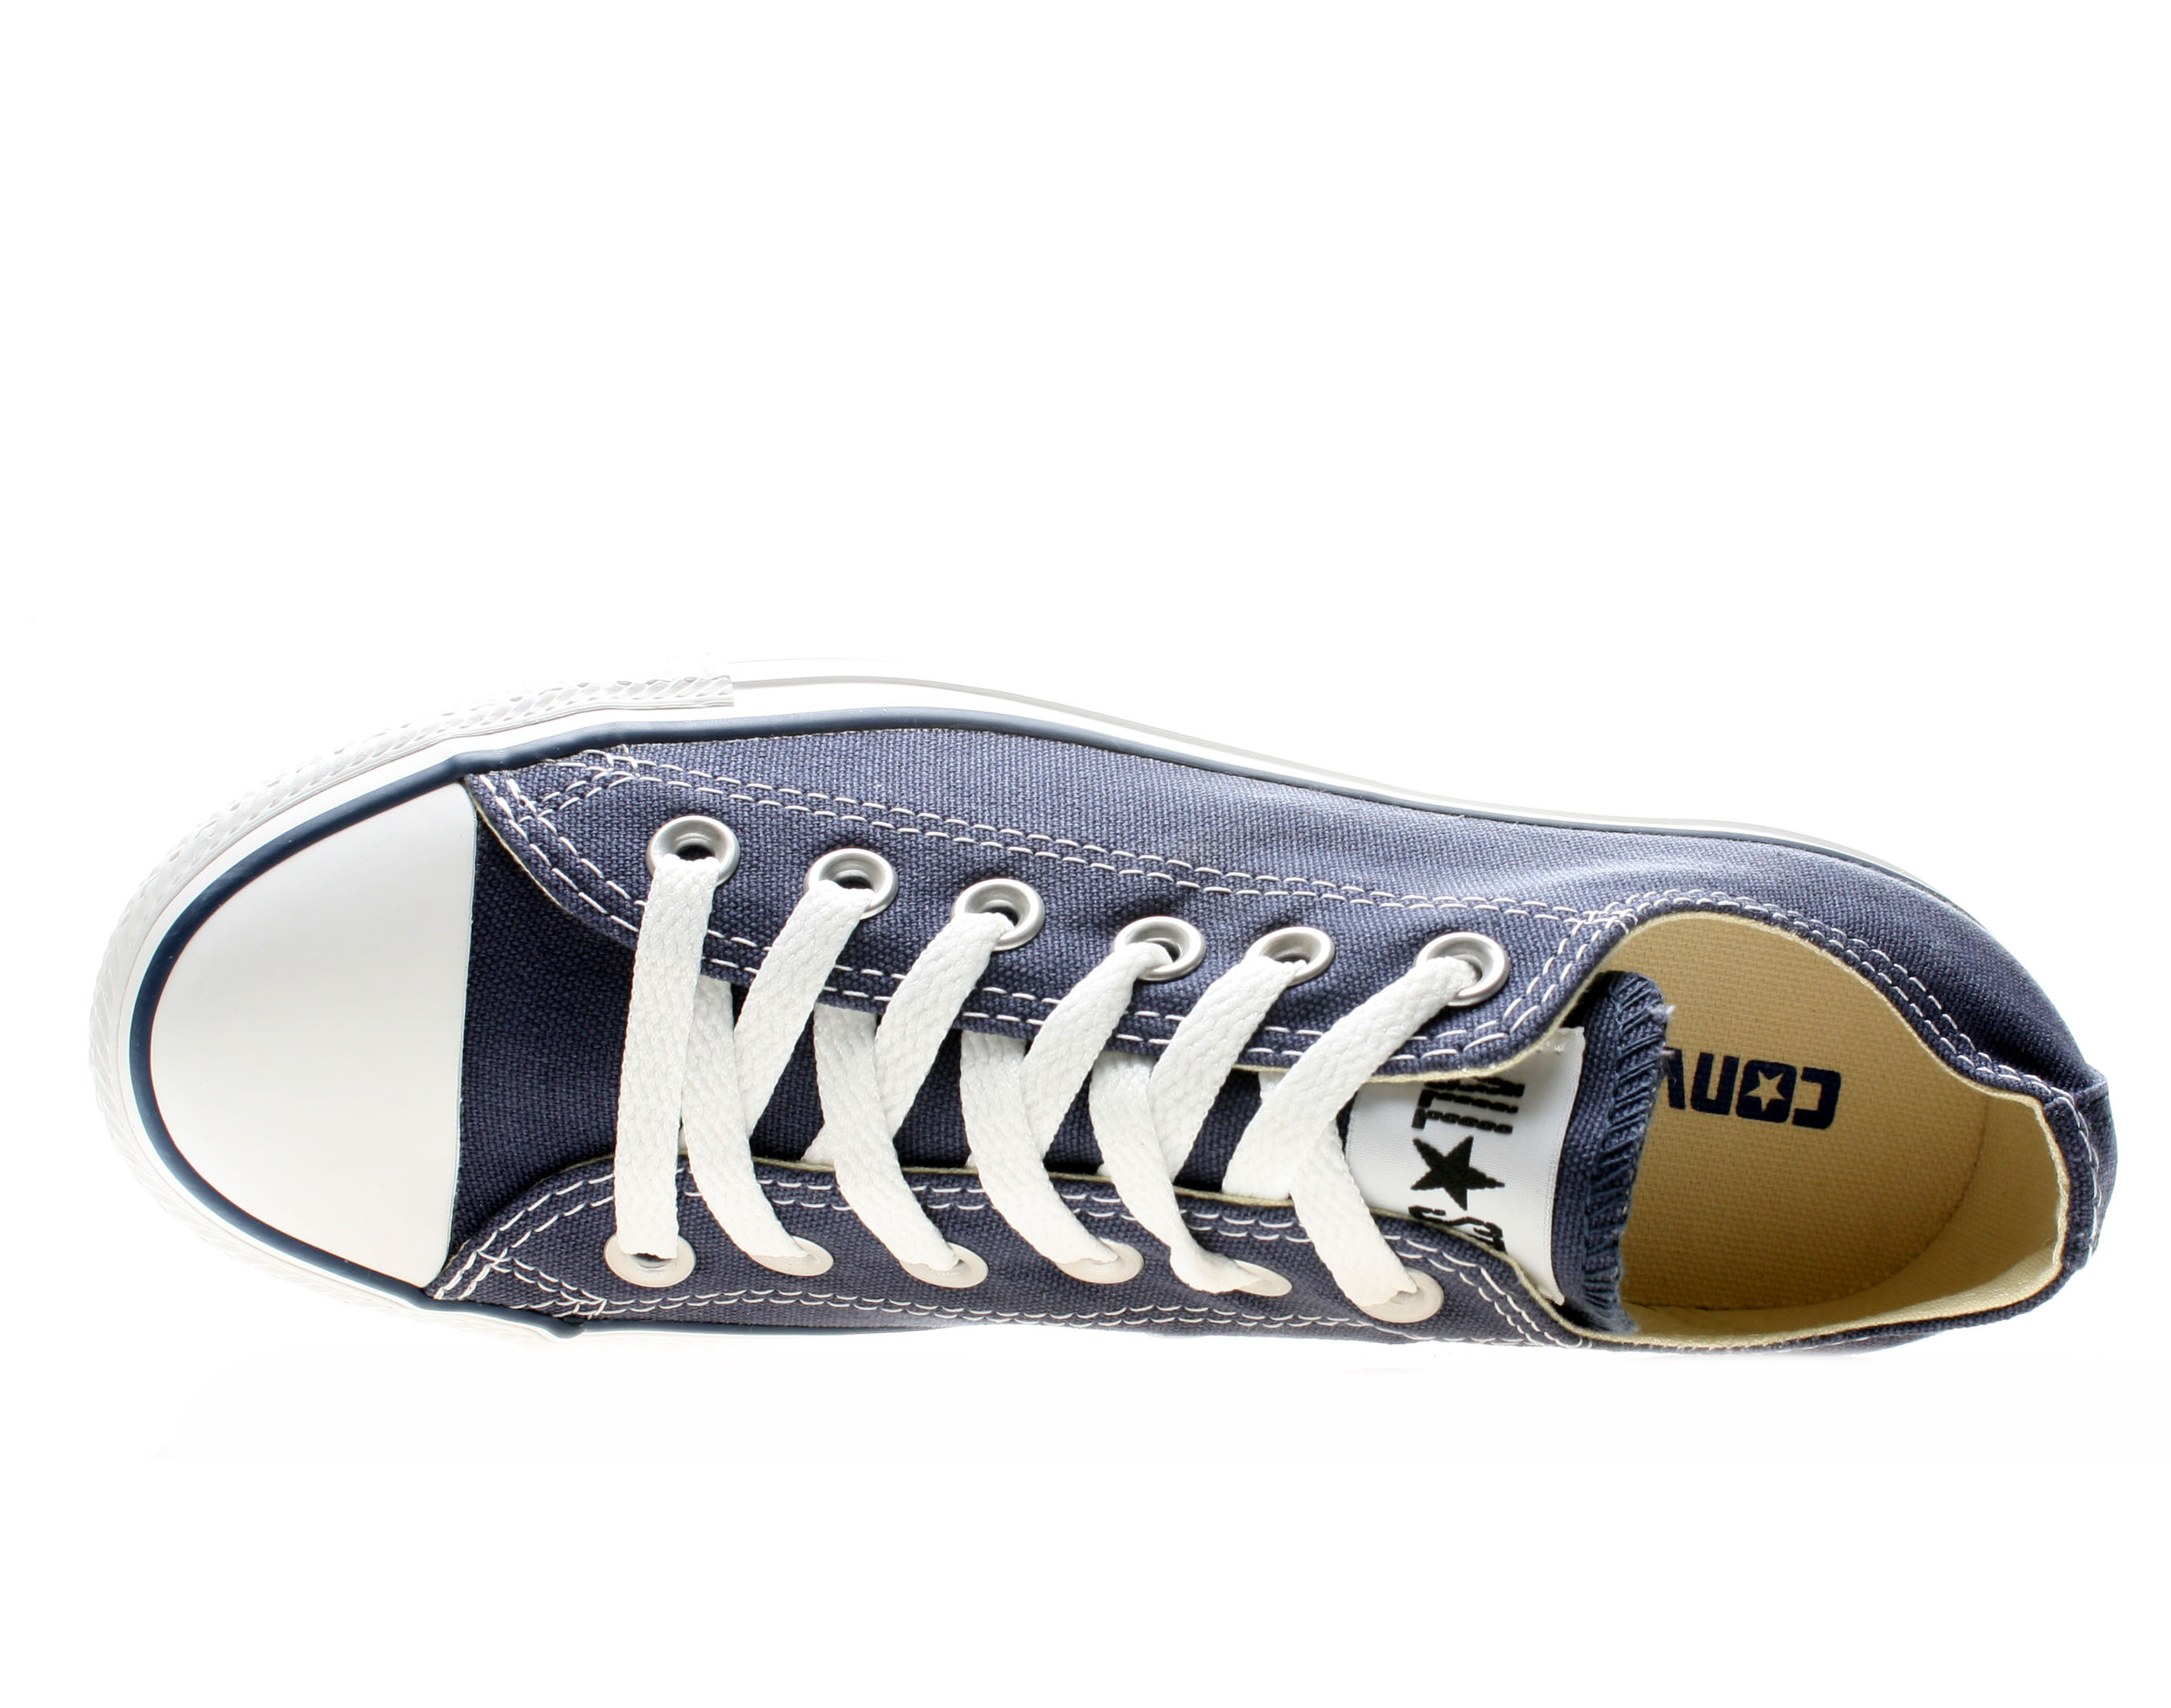 Converse Chuck Taylor All Star Canvas Low Top Sneaker - image 4 of 6